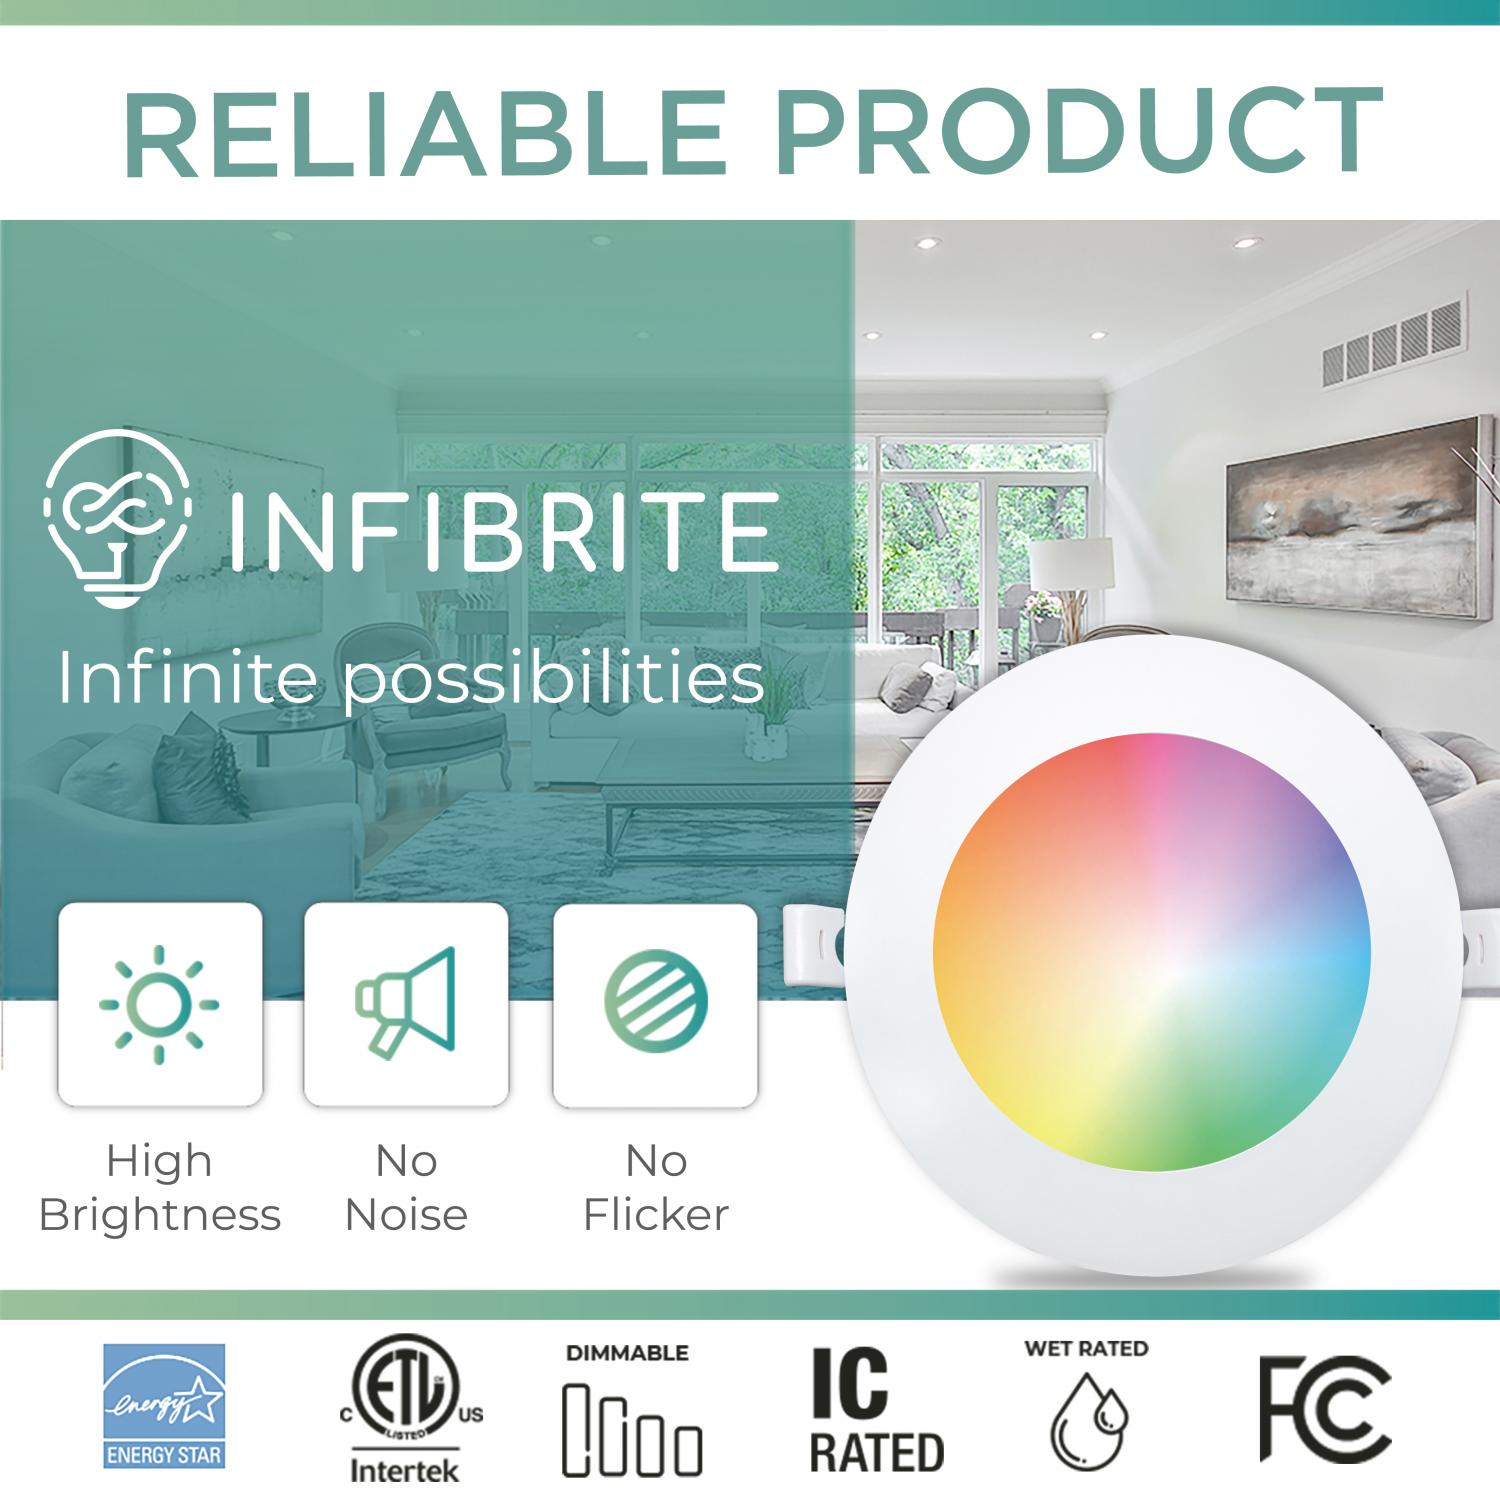 Infibrite 4 Inch Wifi Smart Ultra-Slim LED Ceiling Mount Recessed Light 9W 810LM Dimmable Retrofit with Junction Box, Easy Install, App & Voice Control, Alexa/Google Compatible, ETL & Energy Star, Wet Rated (6 Pack)